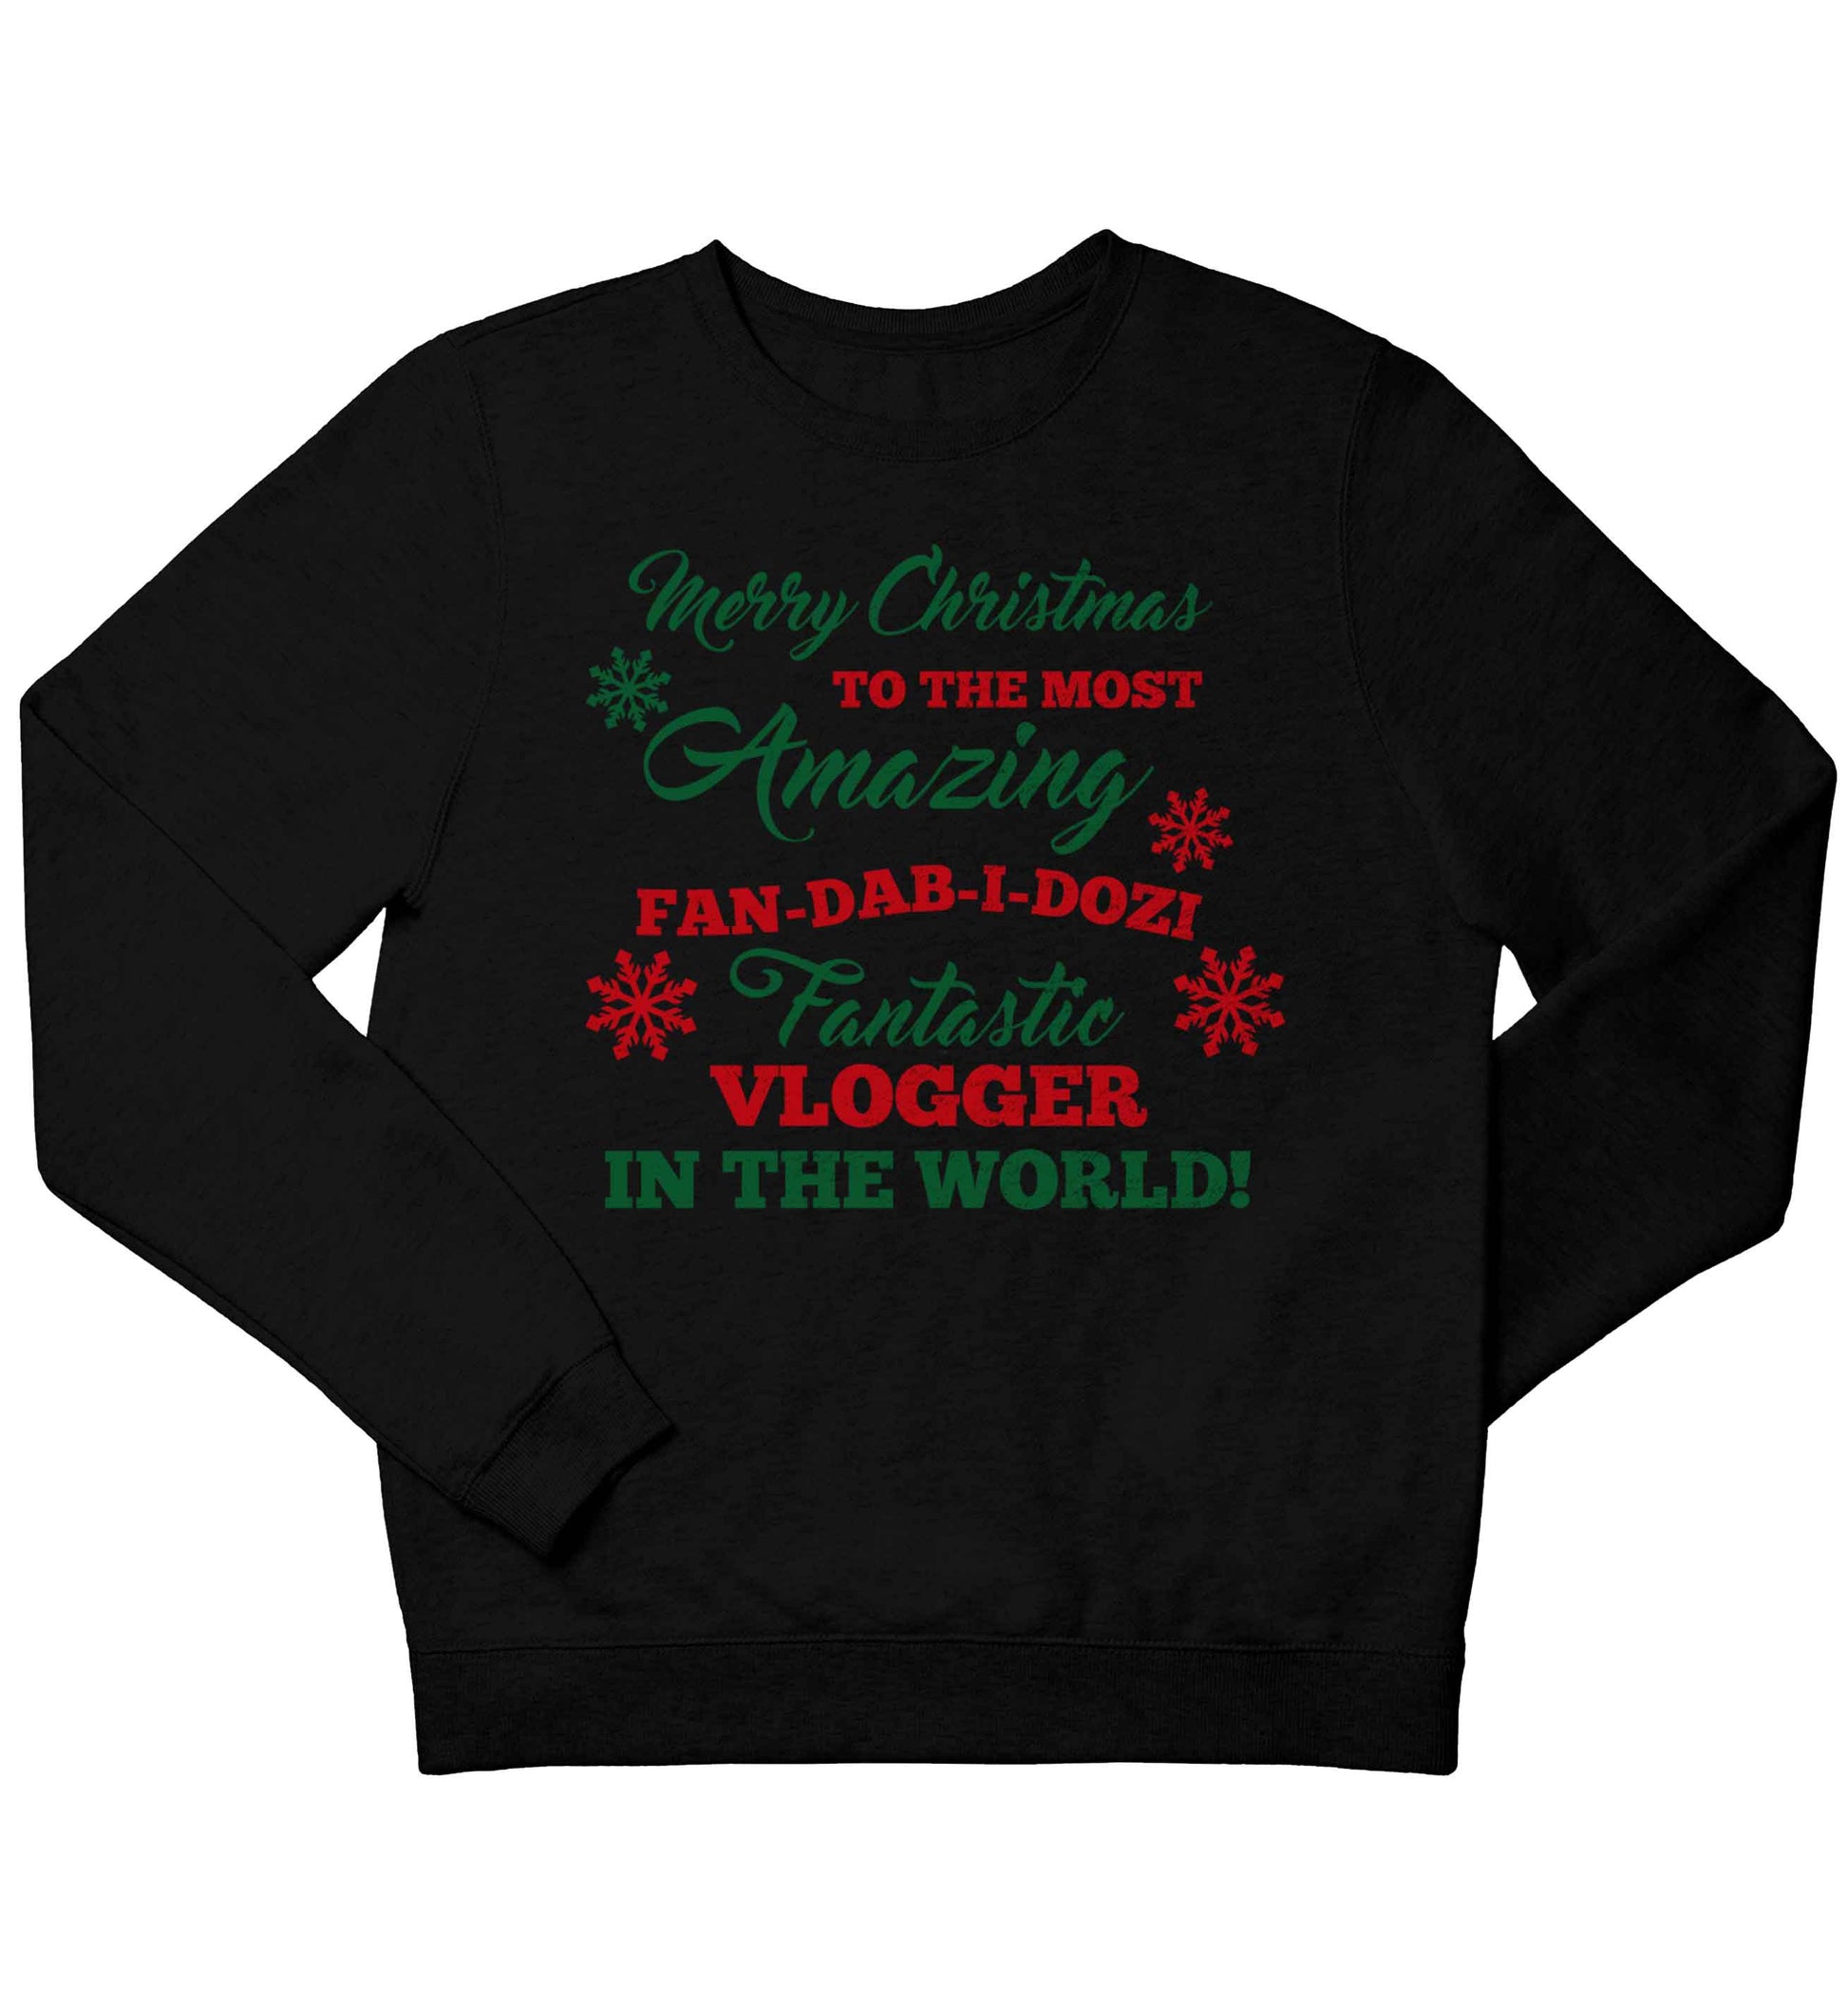 Merry Christmas to the most amazing fan-dab-i-dozi fantasic vlogger in the world children's black sweater 12-13 Years